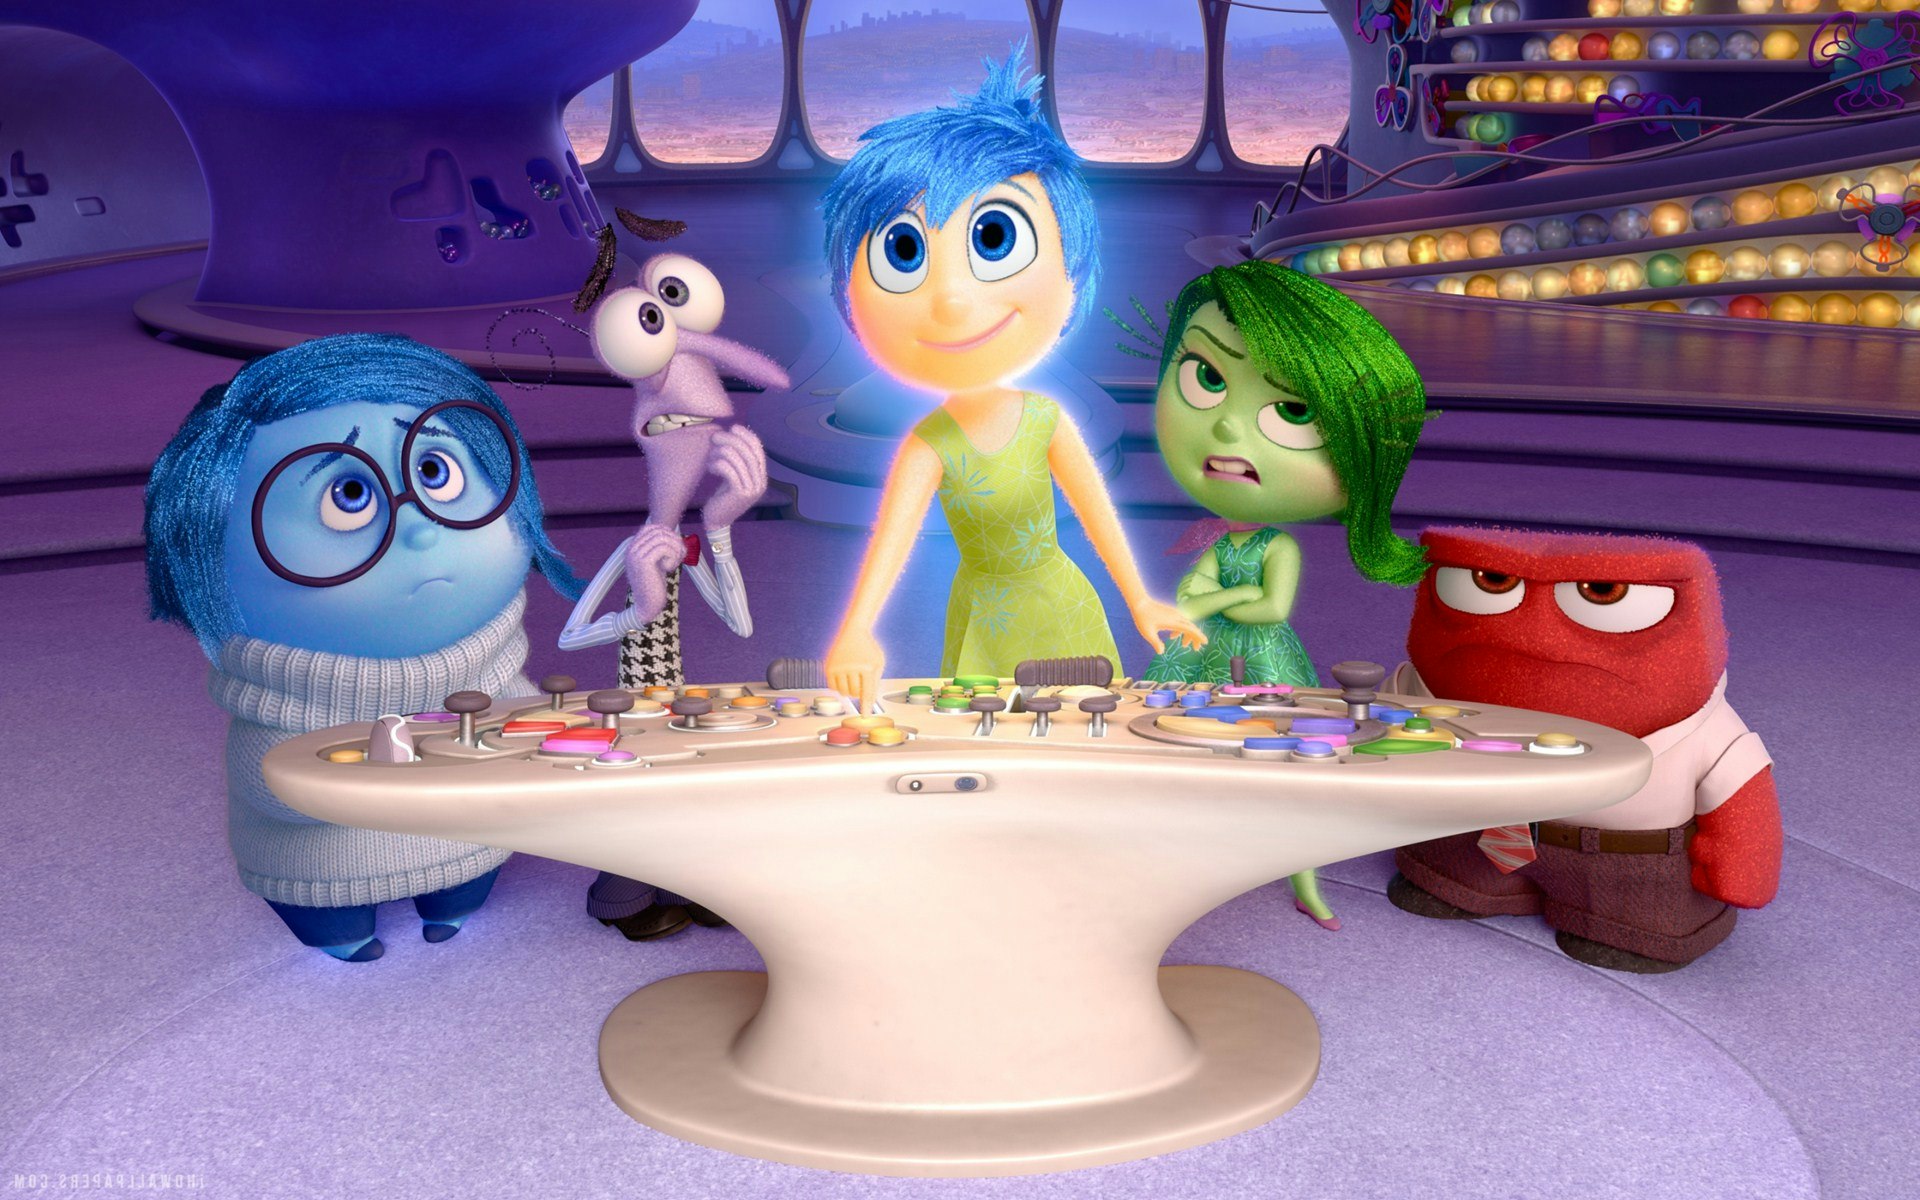 Inside Out Review